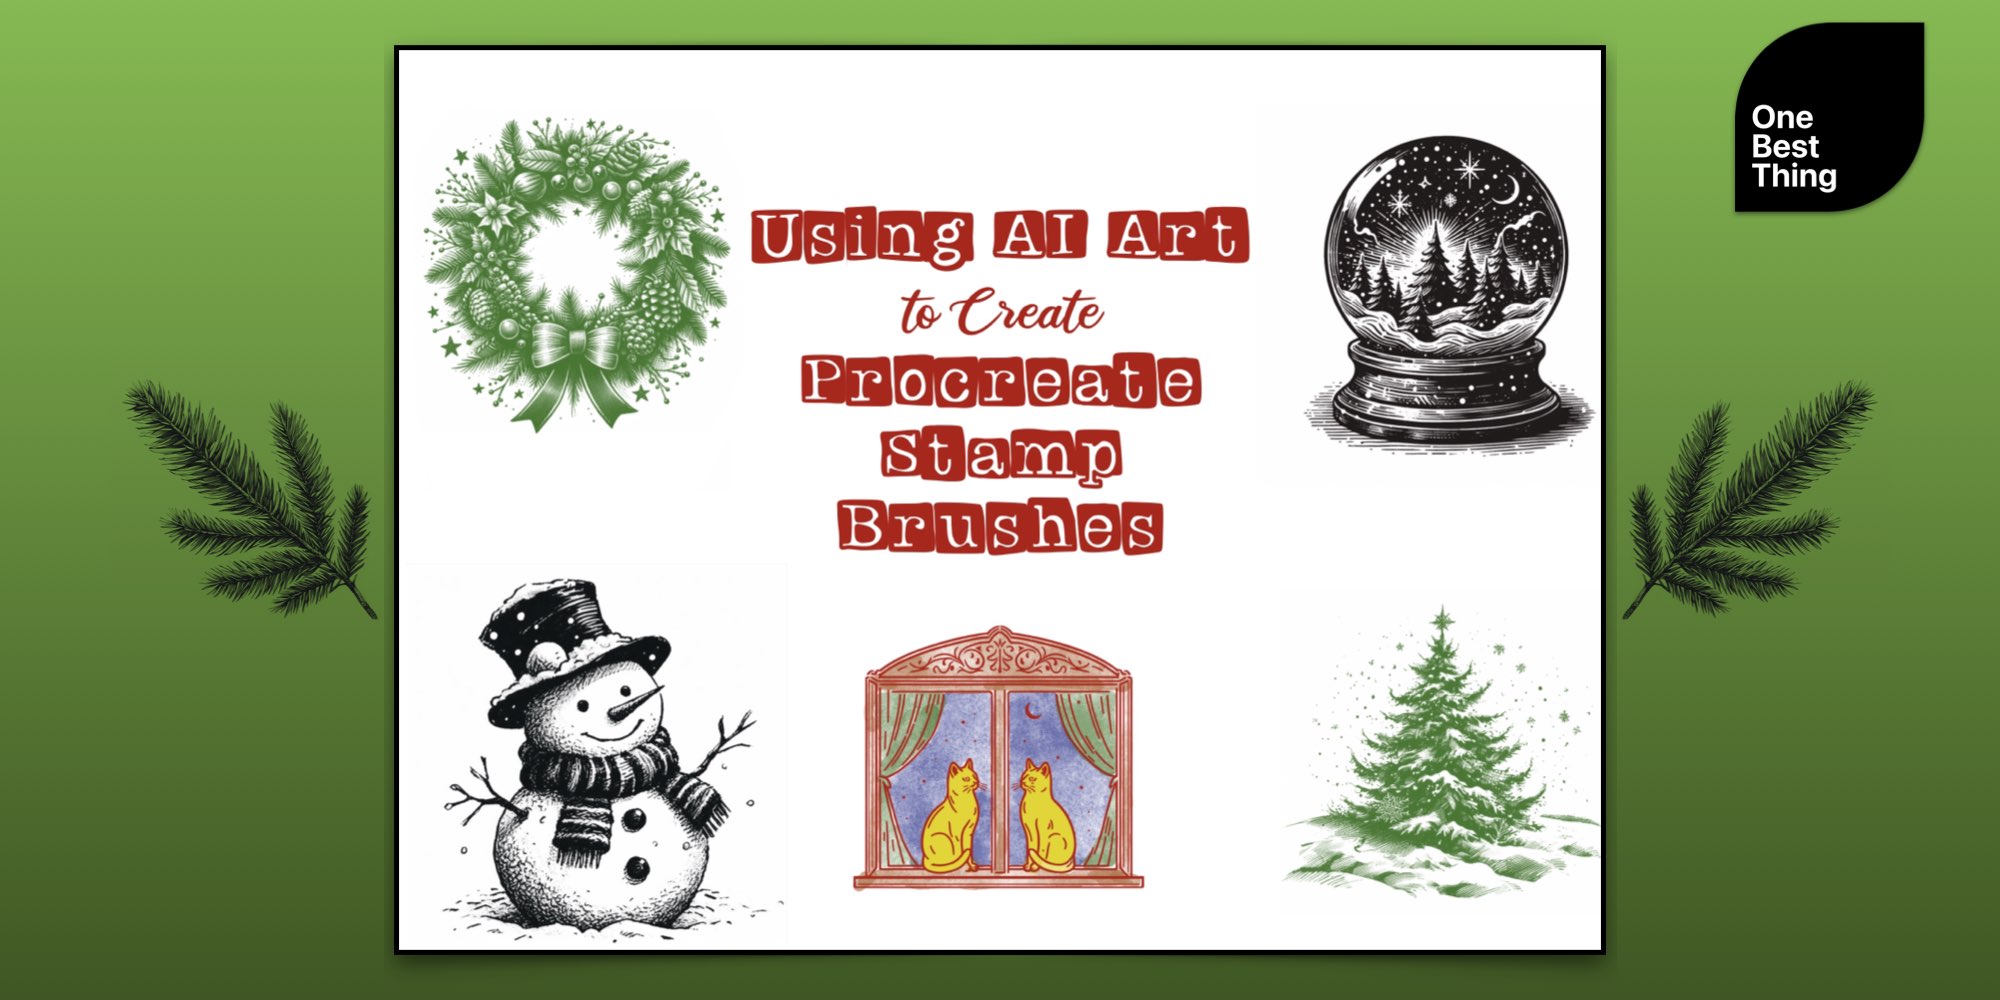 Title "Using AI Art to create Procreate Stamp Brushes" with examples of winter themed stamps - snow globe, pine tree, snowman